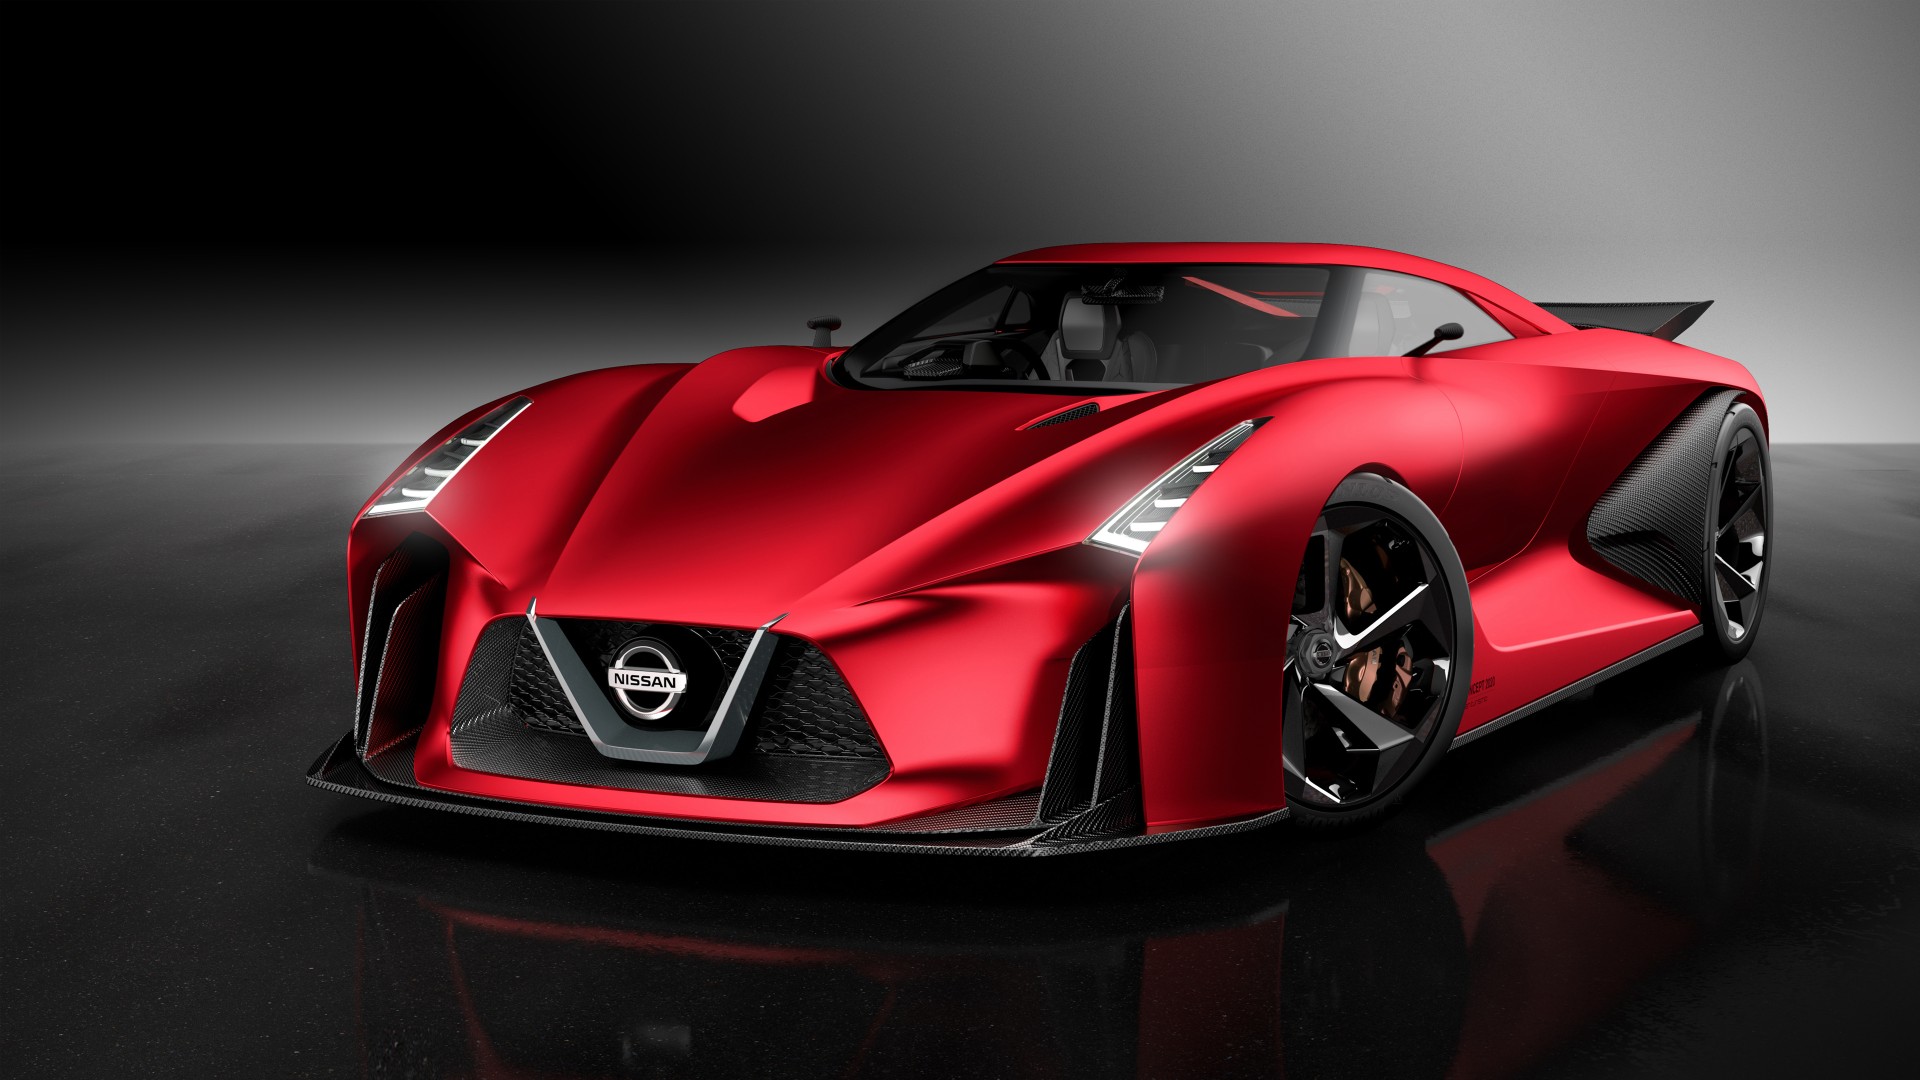 8 Latest Car wallpaper nissan gtr with articles 